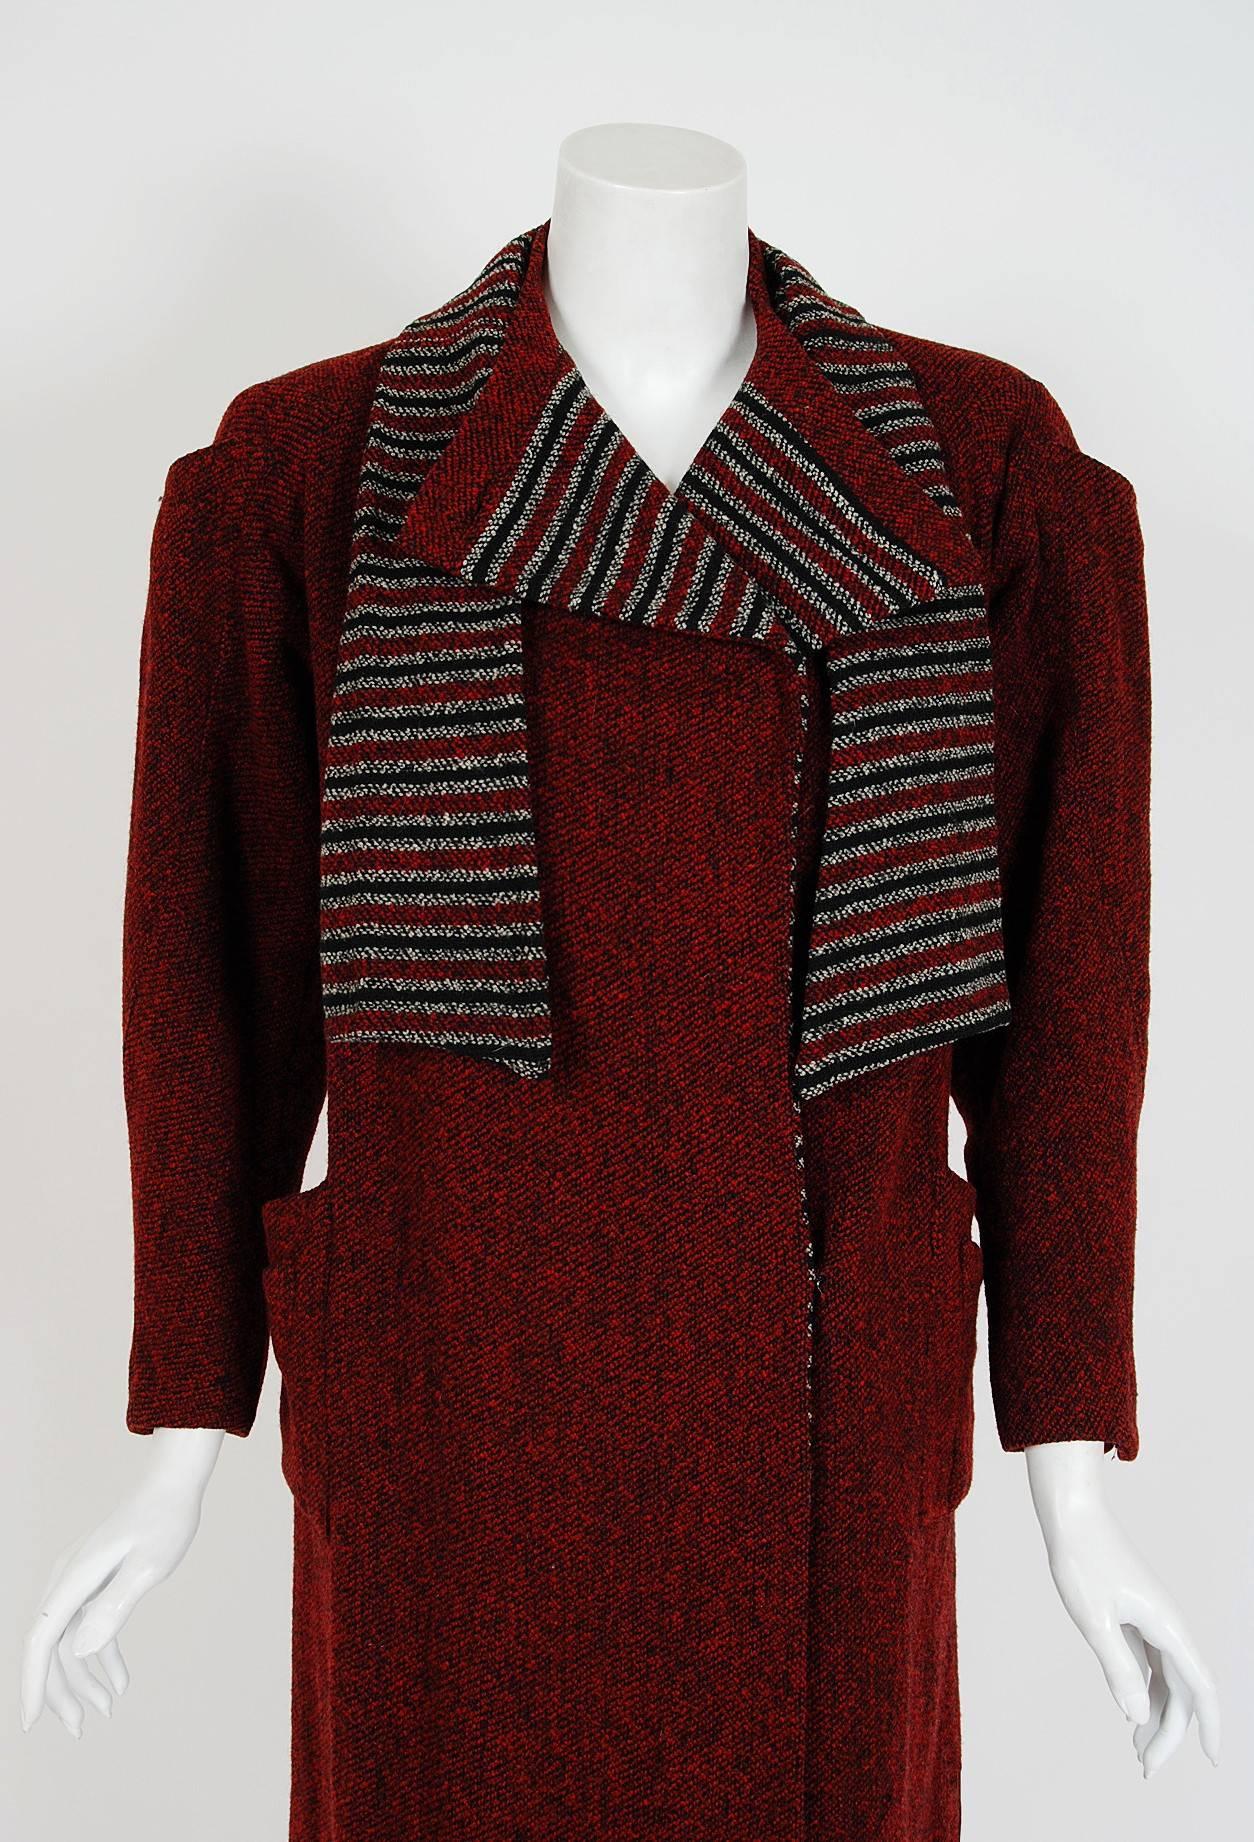 There are lots of lovely 1920's garments still around, but every once in a while I come across one that sets my heart a flutter! This is an extraordinarily beautiful and exceptional 1920's burgundy-red wool coat with matching skirt from Jays Boston.